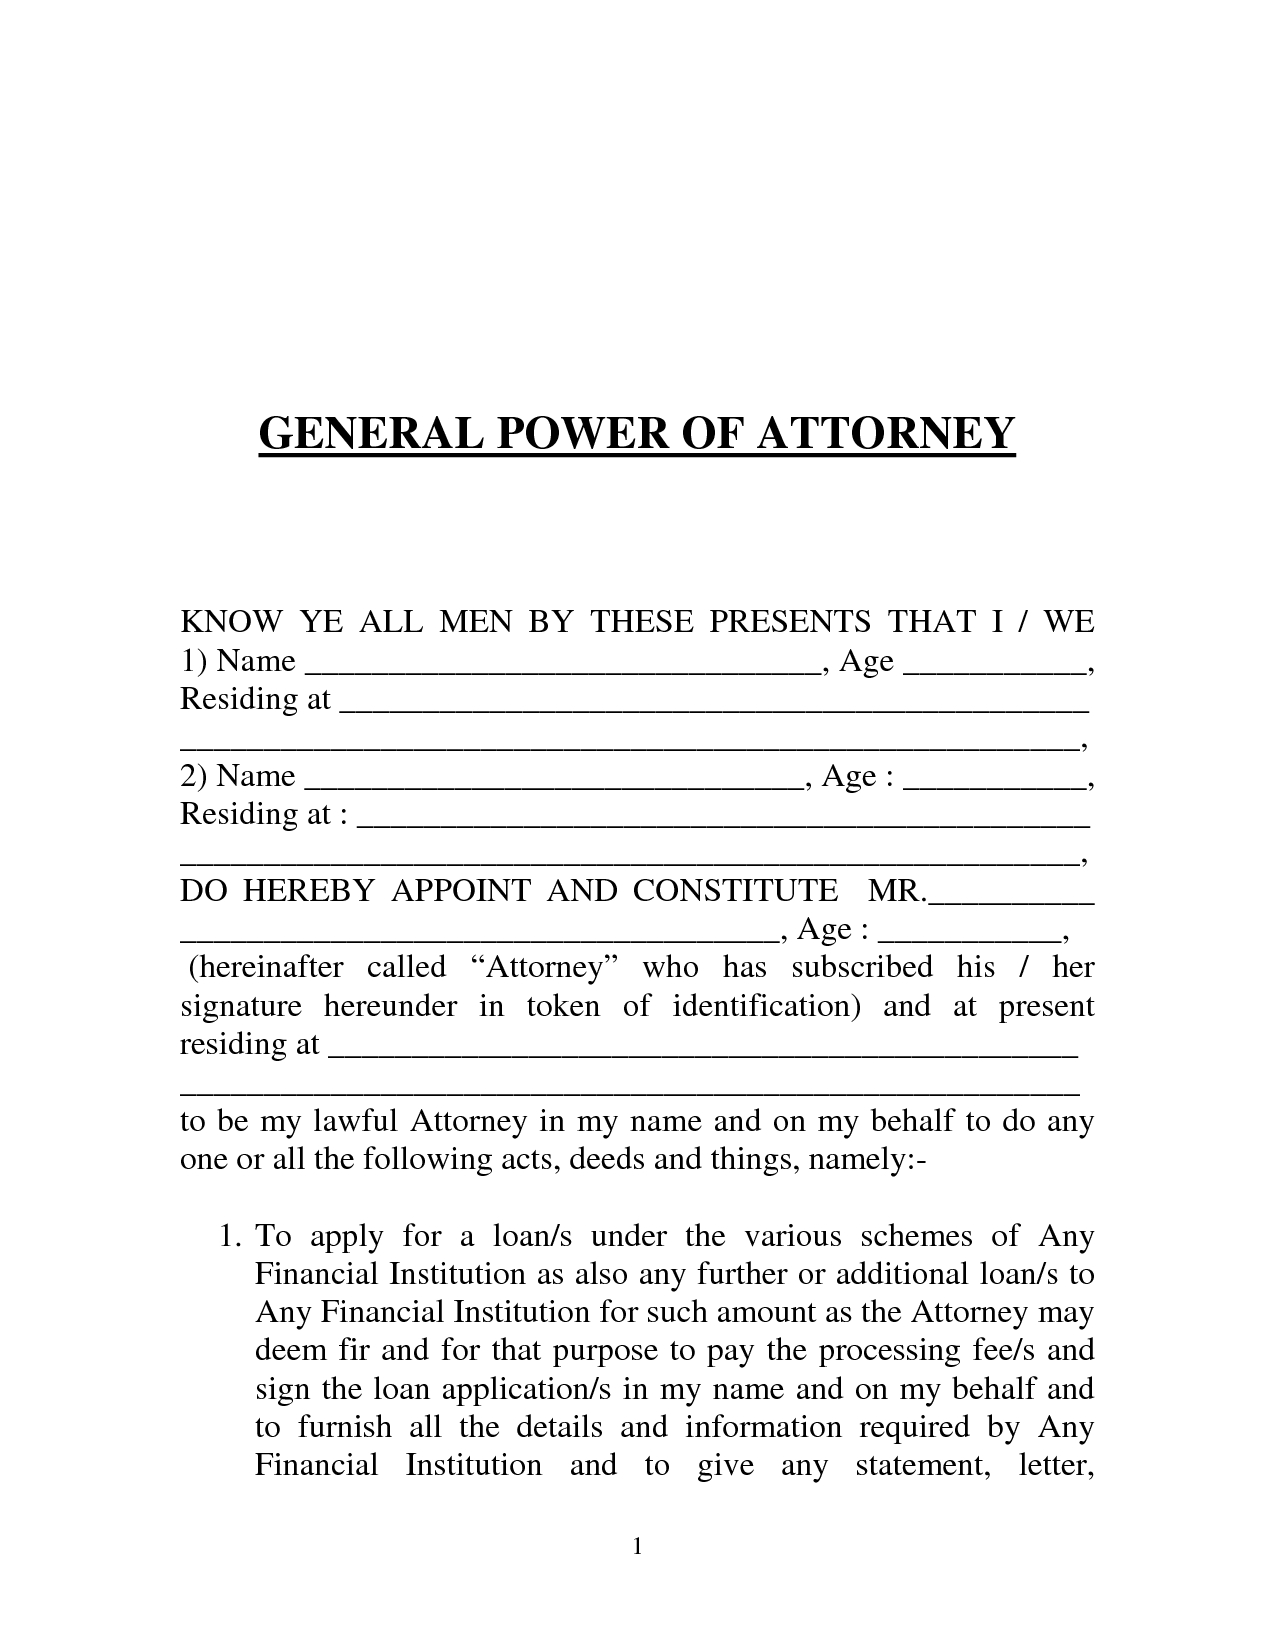 Free Printable Power Of Attorney Form (Generic) - Free Printable Power Of Attorney